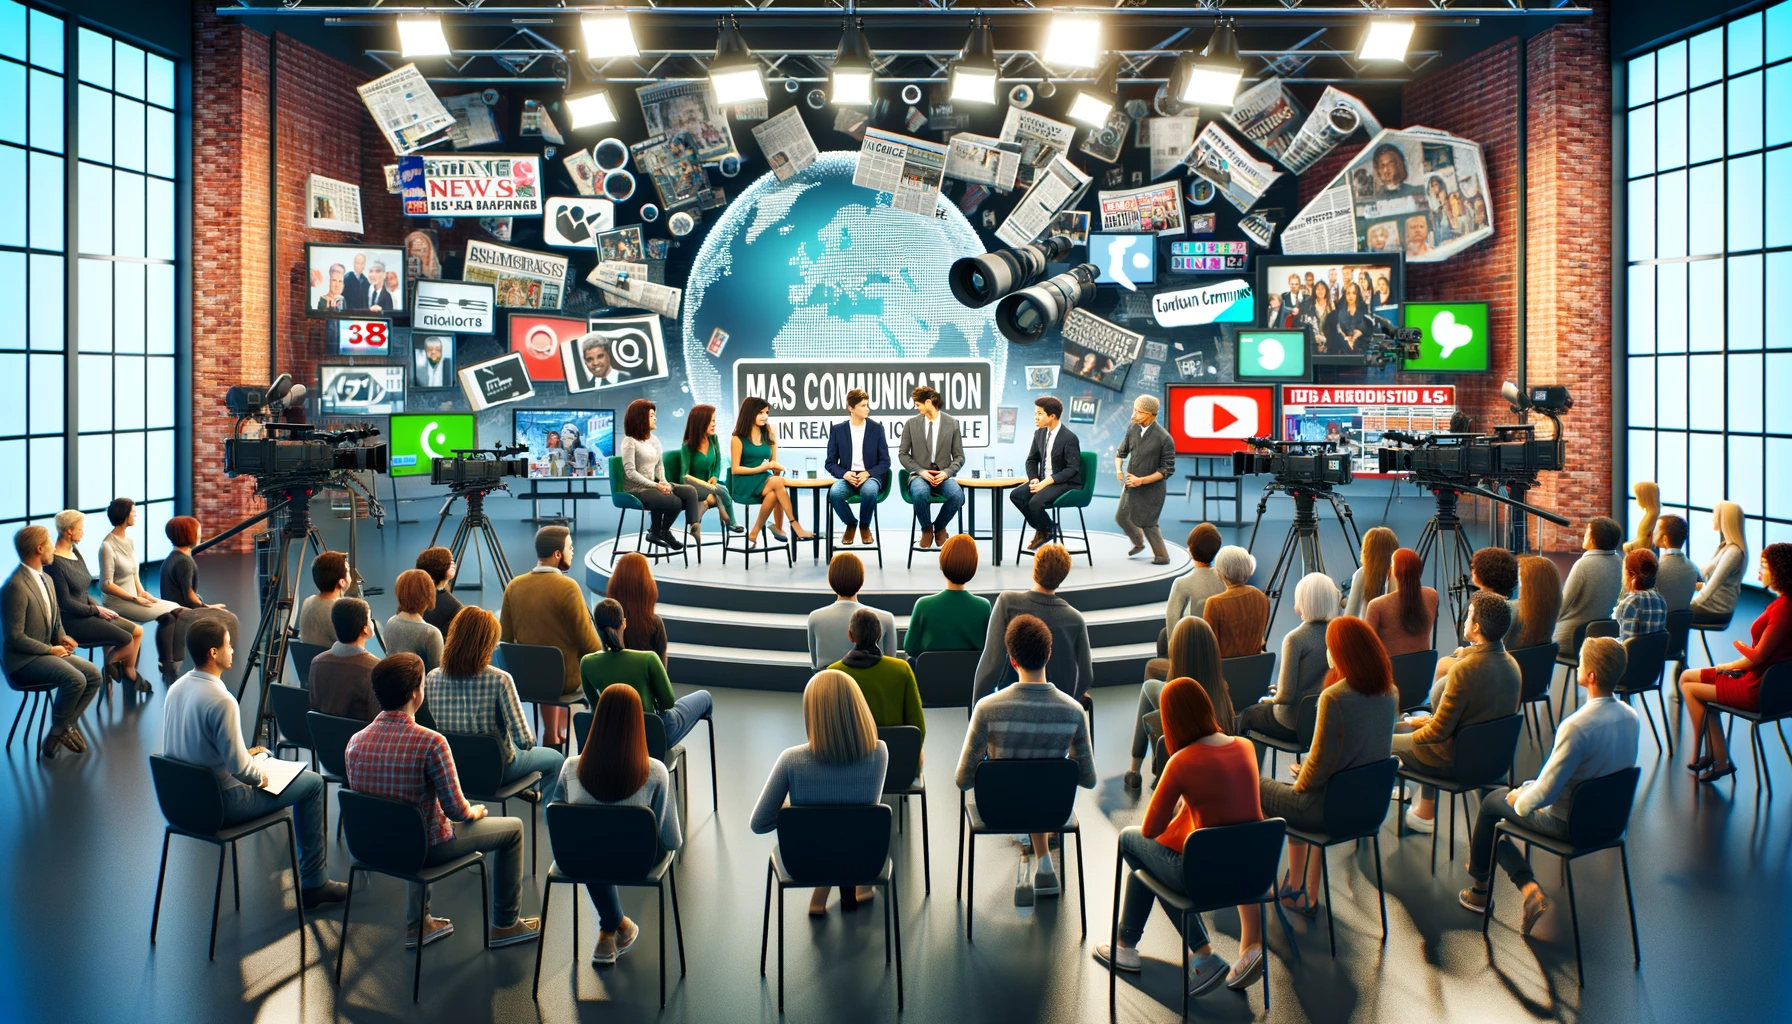 educational television programs for mass communication in real life